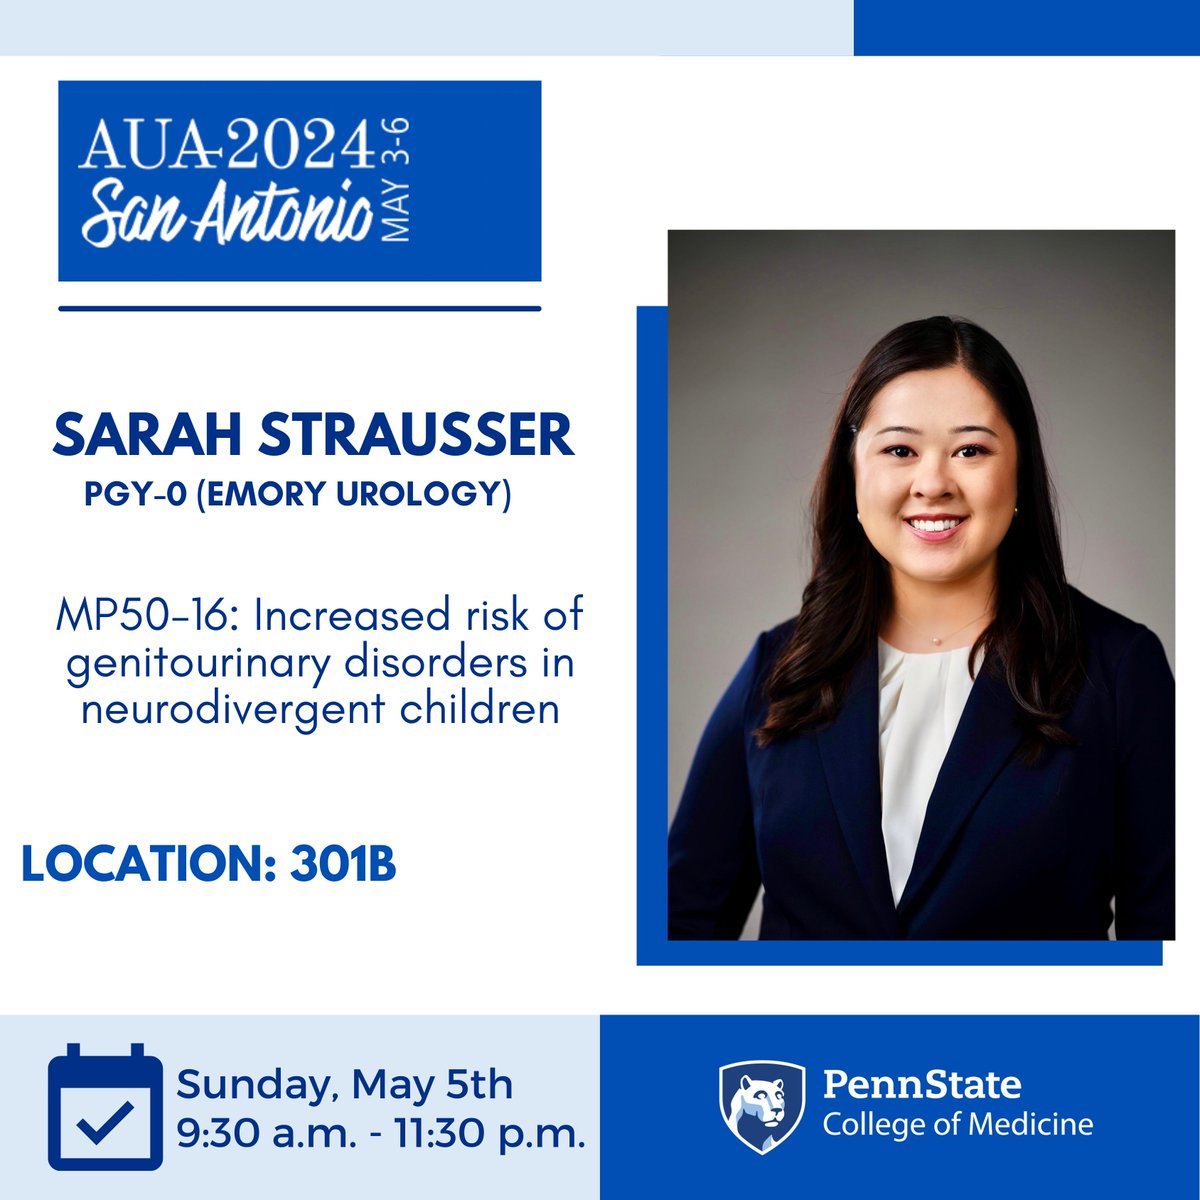 Current MS4 and soon to be PGY-1 at @emory_urology, Sarah Strausser, is presenting on the increased risk of genitourinary disorders in neurodivergent children this morning! Make sure you check out her research! #AUA24 #AUA2024 #UroSoMe #Urology #Research #SanAntonio